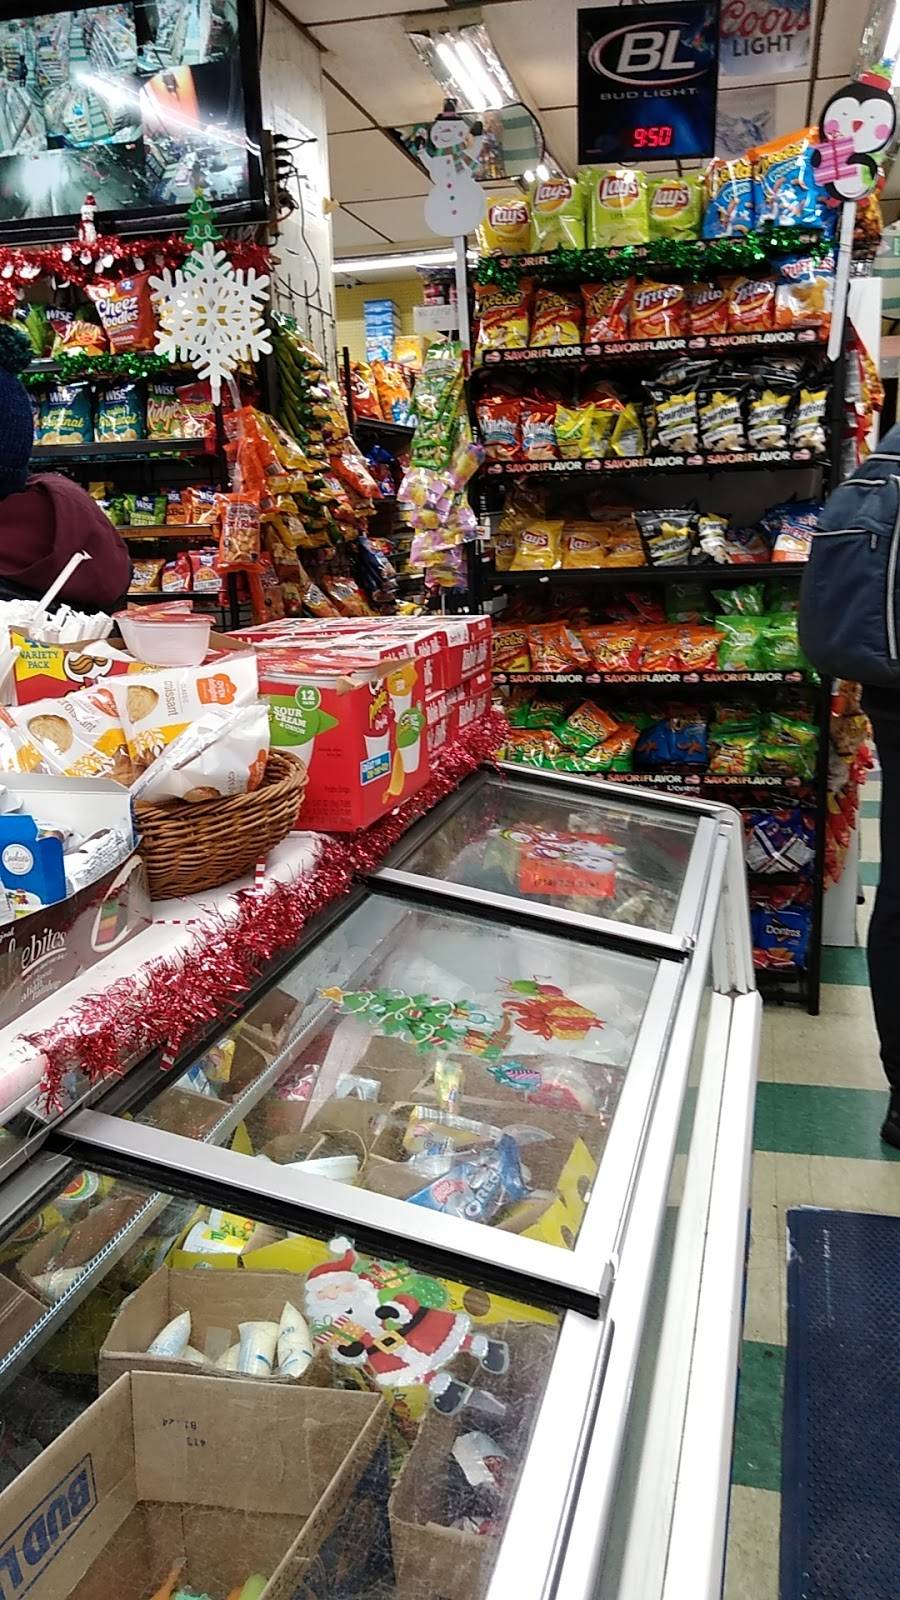 24 Hours Deli Grocery Store | restaurant | 726 E 152nd St, Bronx, NY 10455, USA | 7186650288 OR +1 718-665-0288